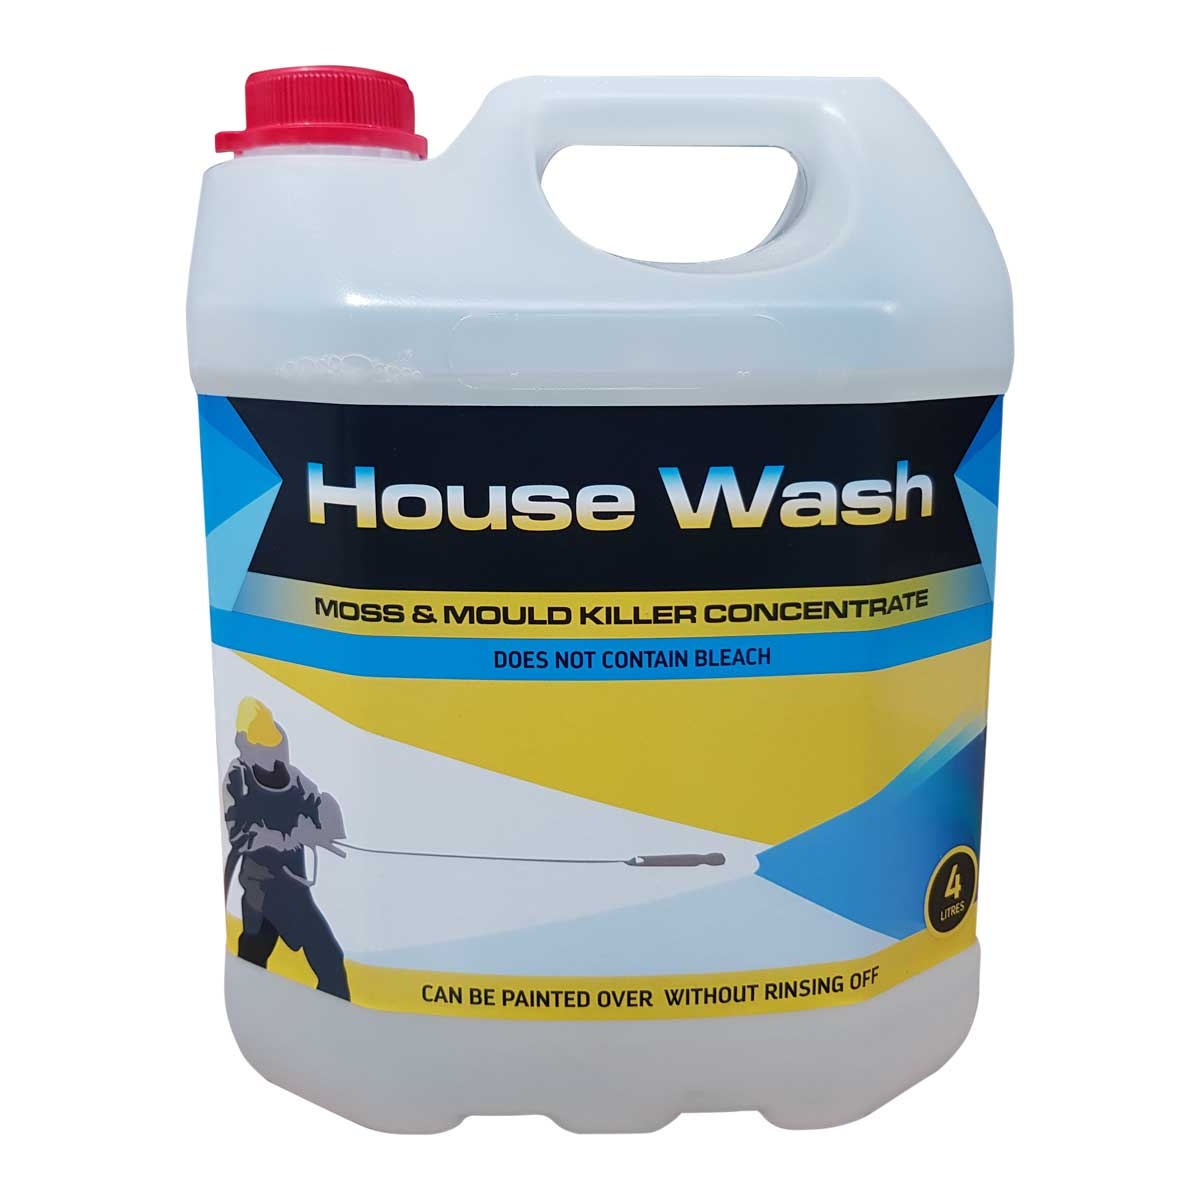 House Wash Moss & Mould Killer Concentrate